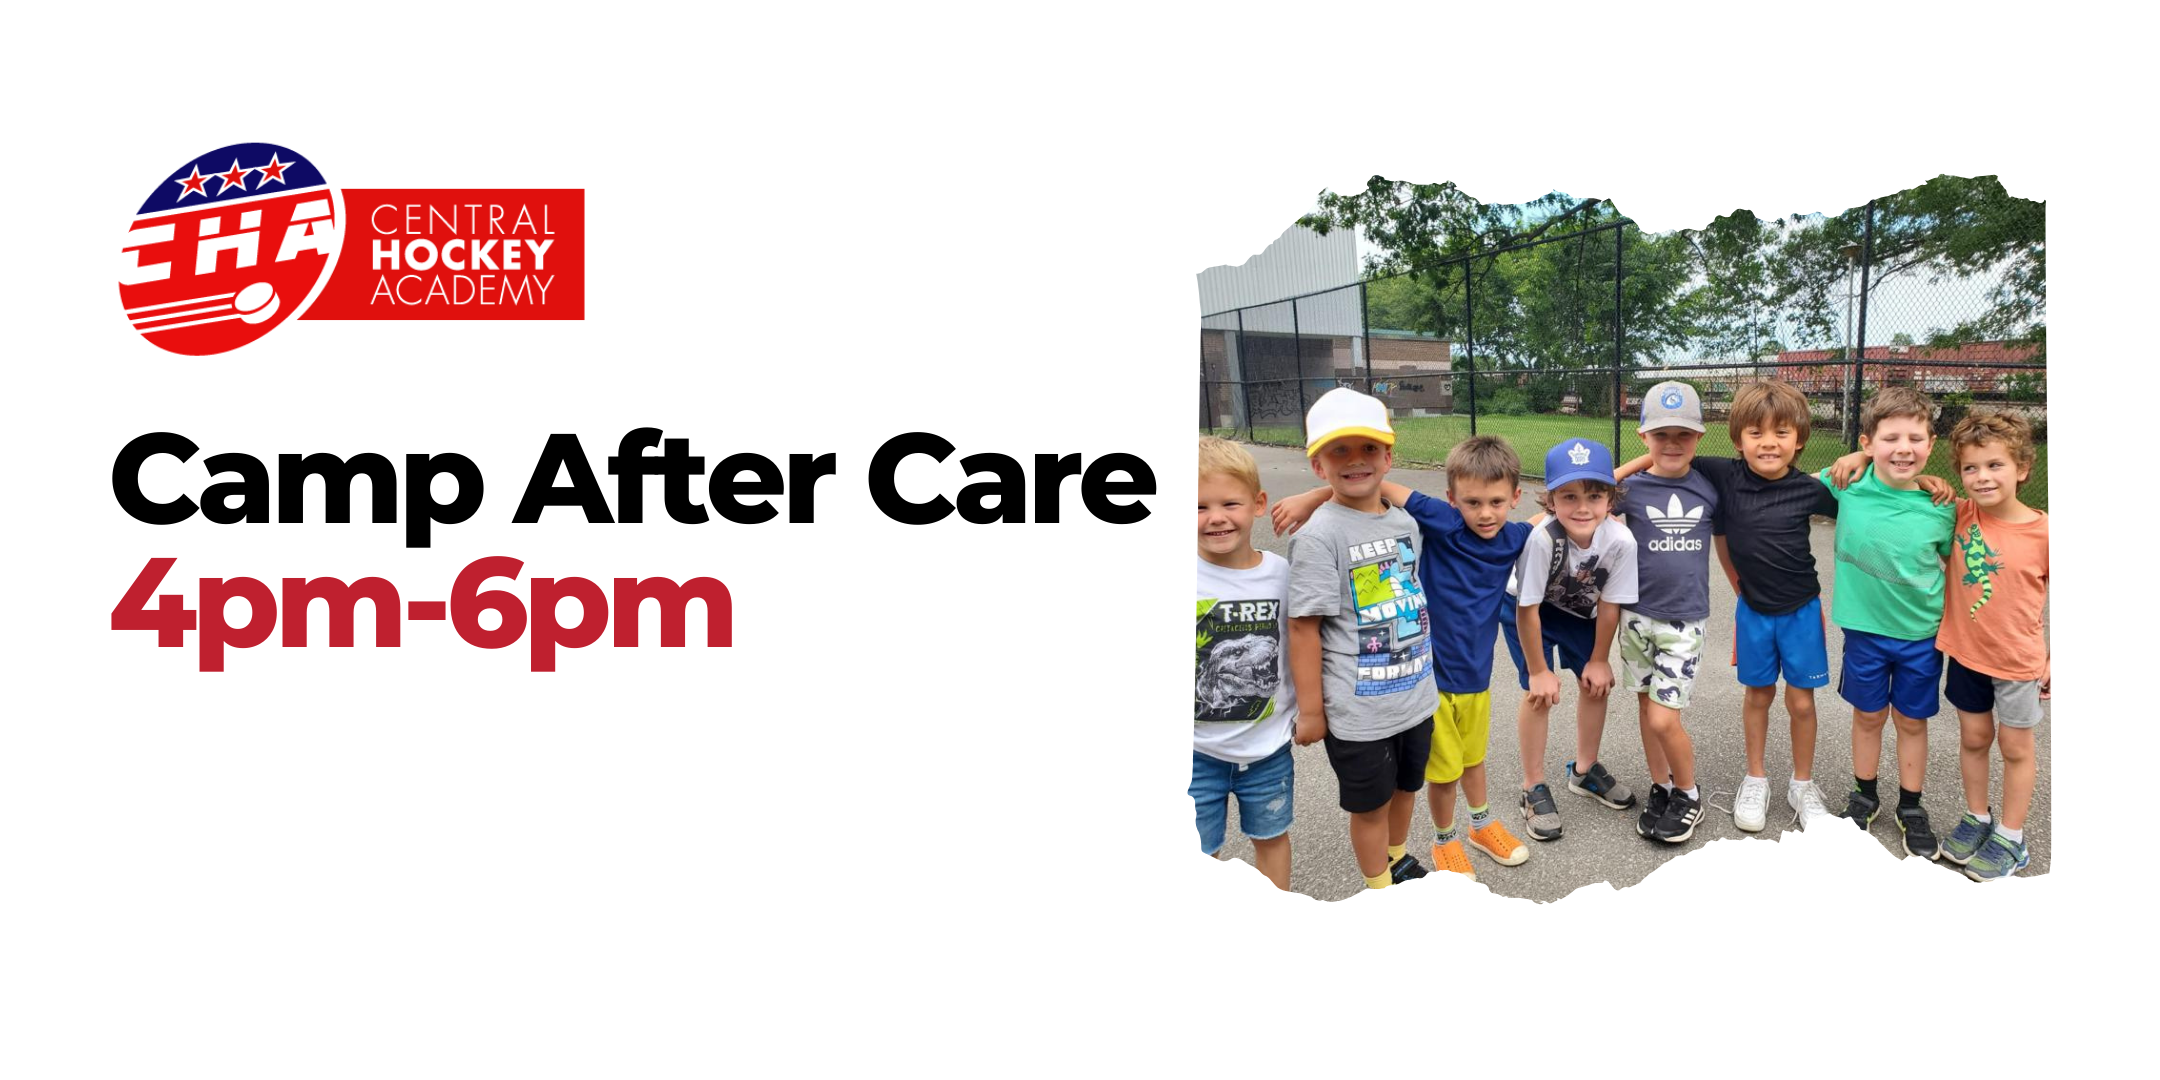 After Care July 29-Aug 2